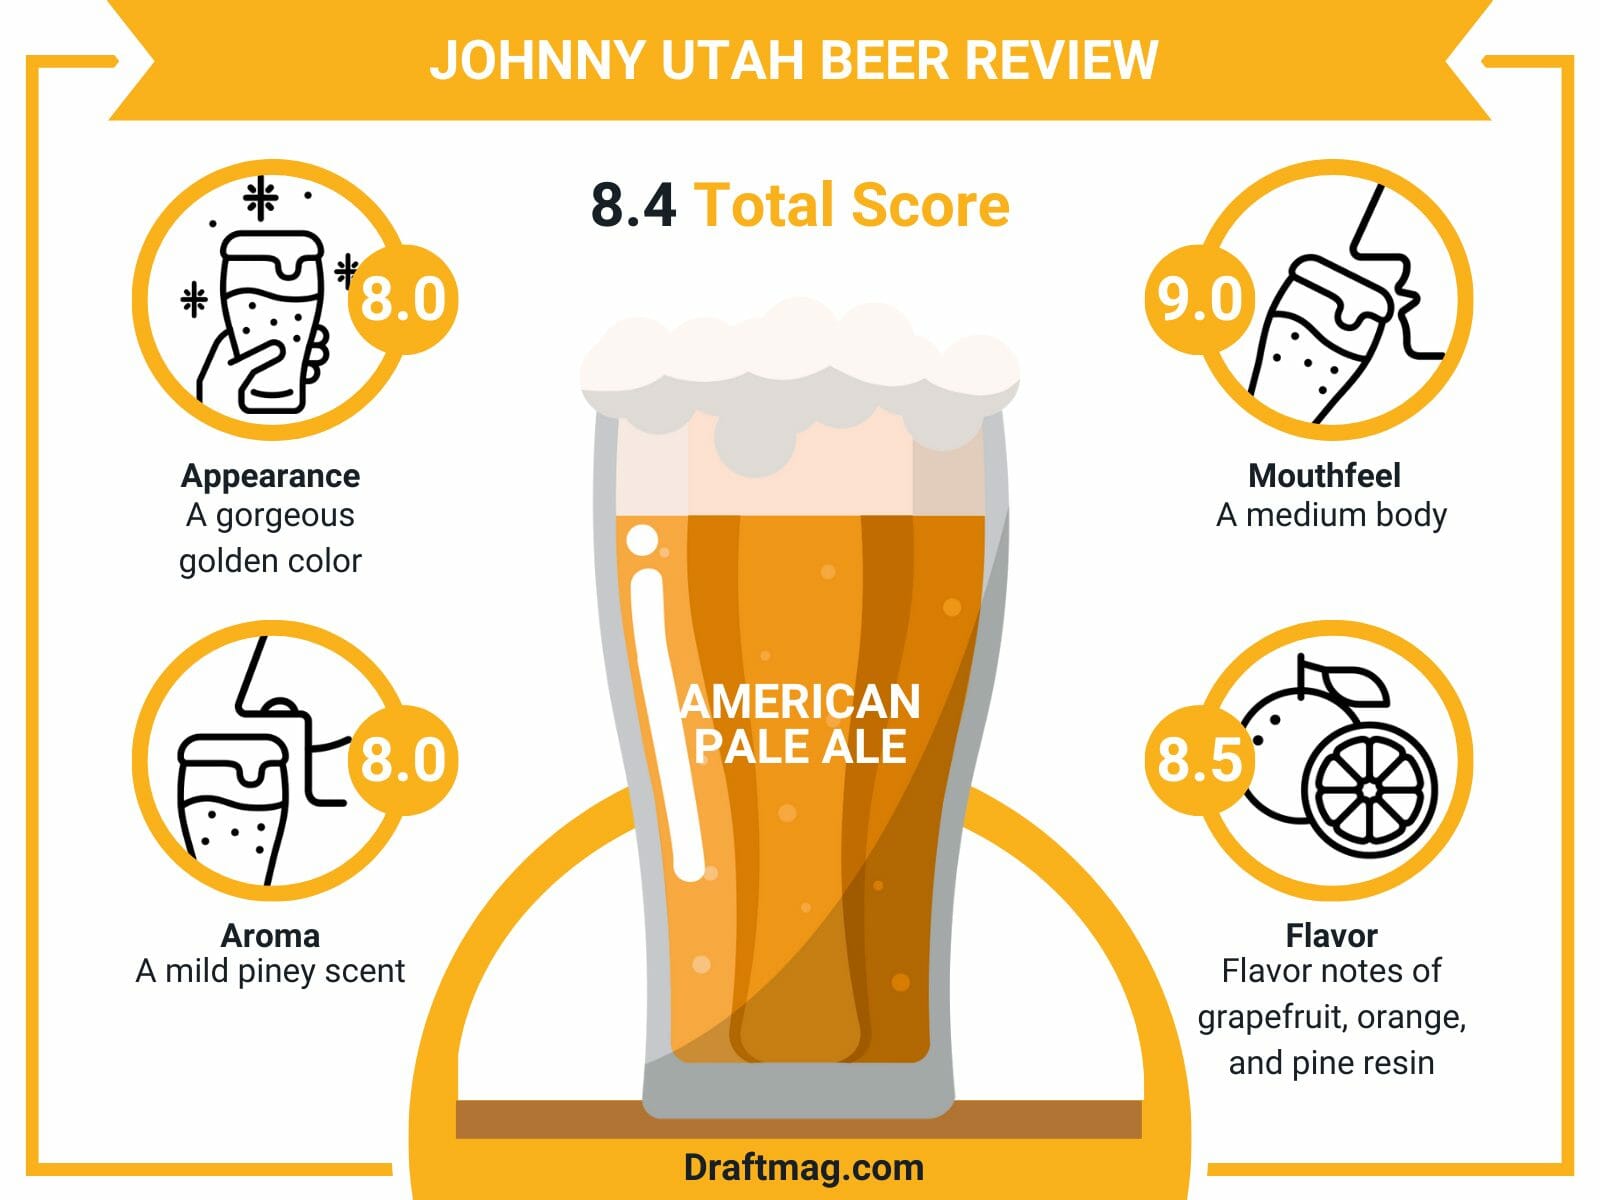 Johnny utah beer review infographic